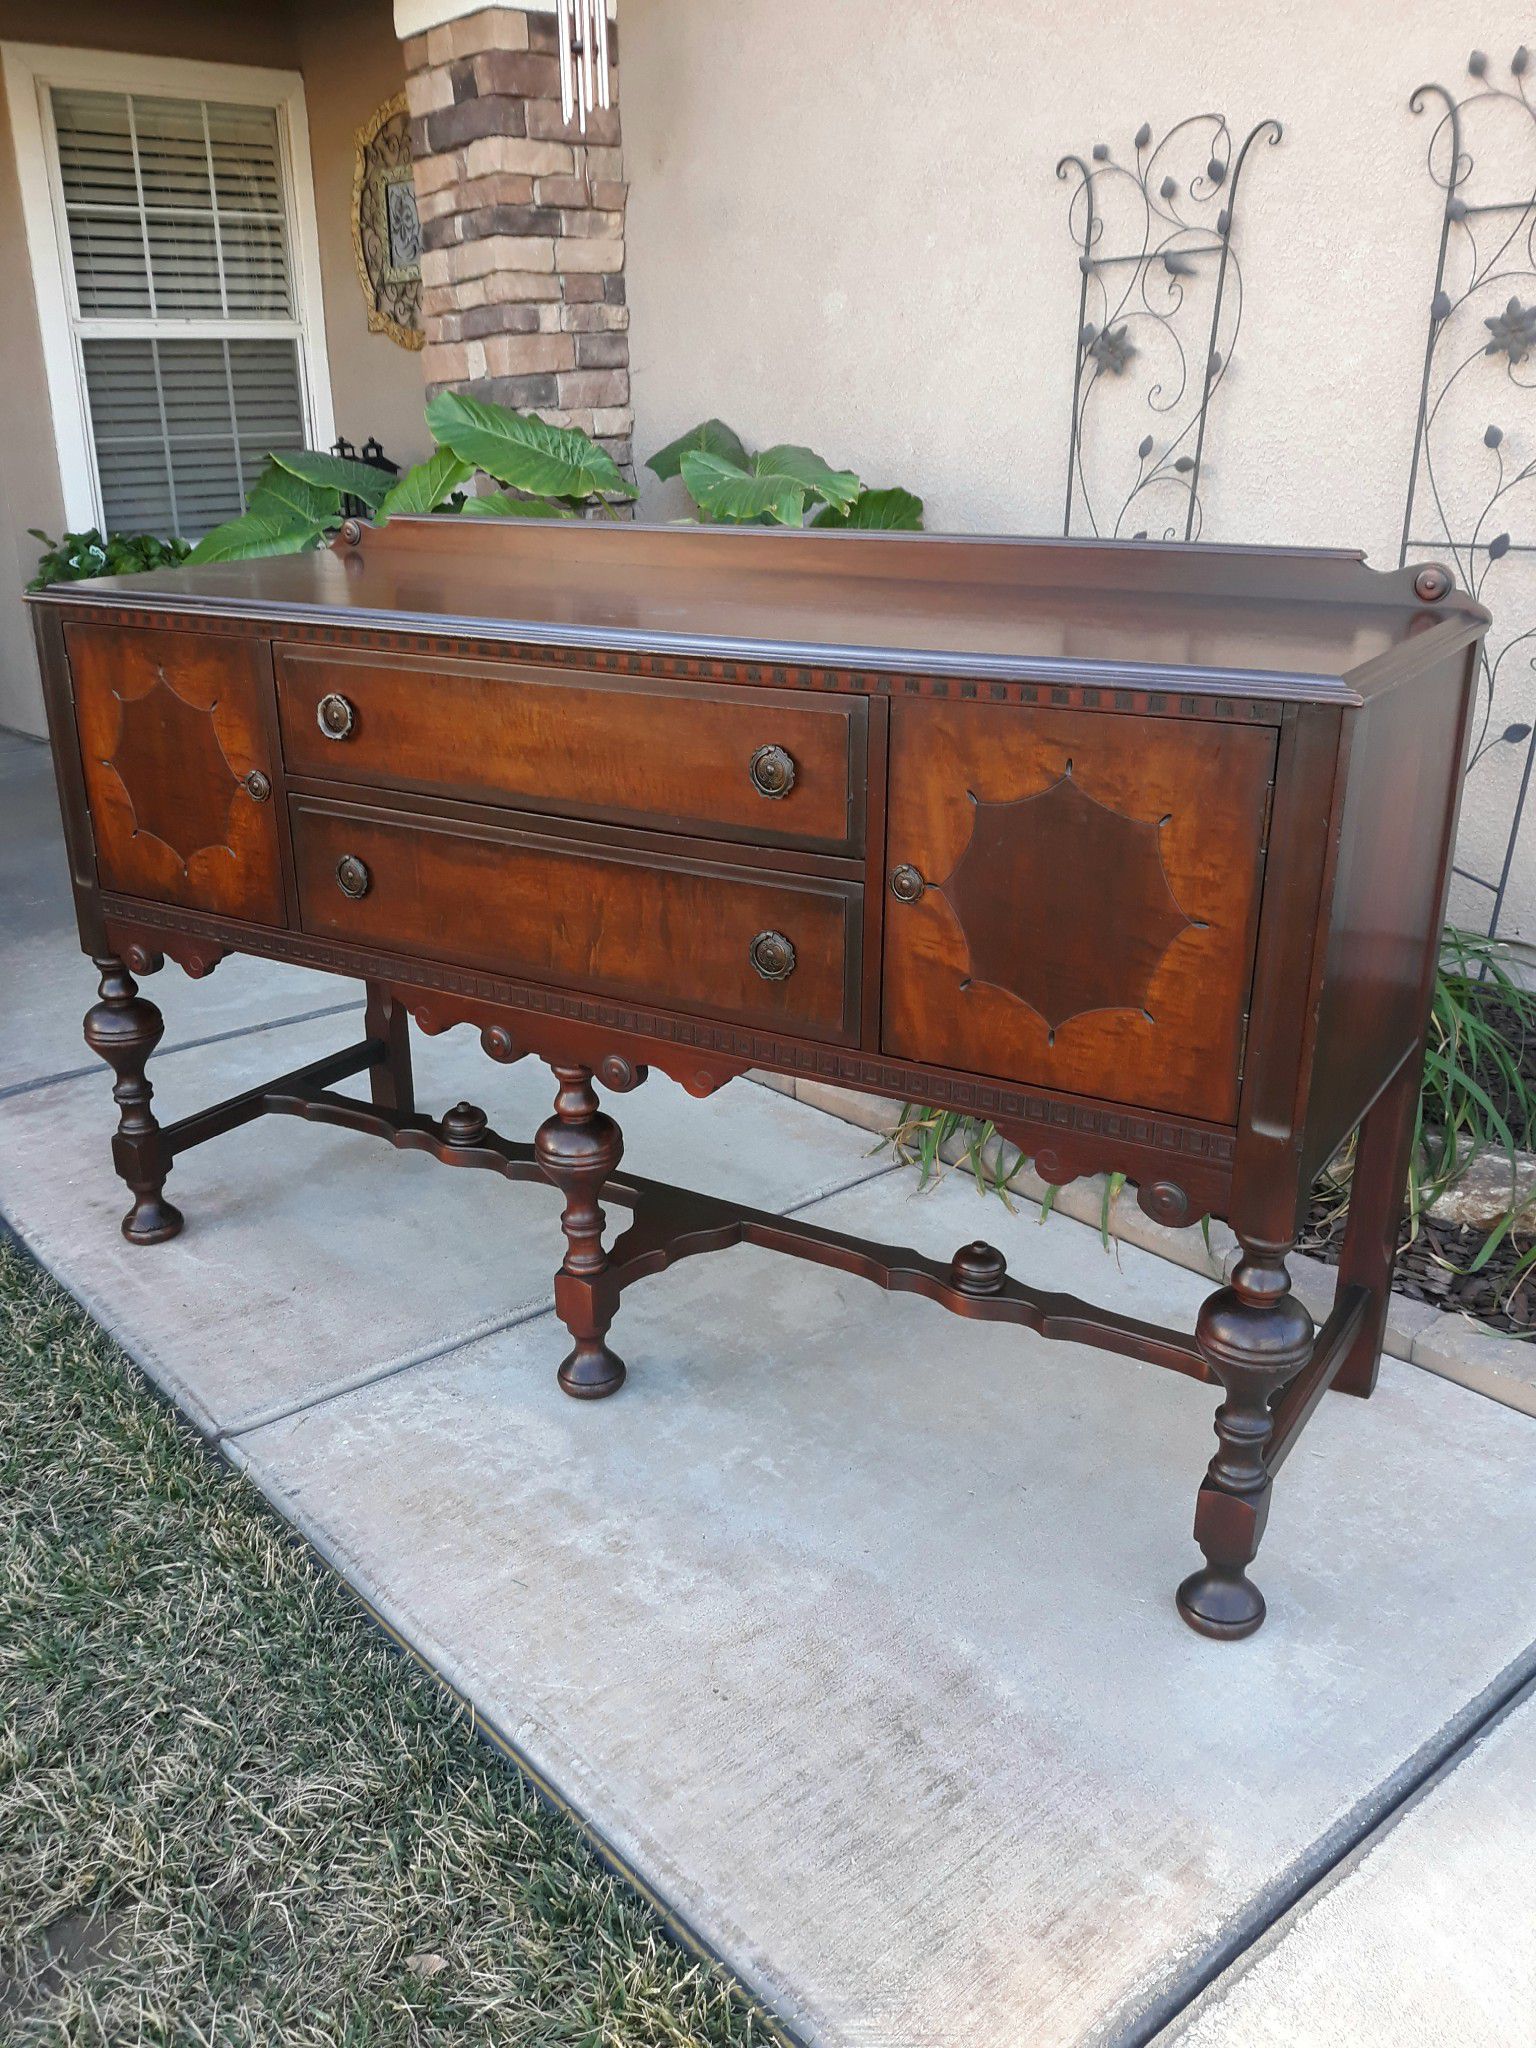 ANTIQUE "TOMLINSON FURN CO." SIDEBOARD / BUFFET / ENTRYWAY PIECE / TV STAND (CIRCA 30'S/40'S) 66"W × 22"D × 39"H